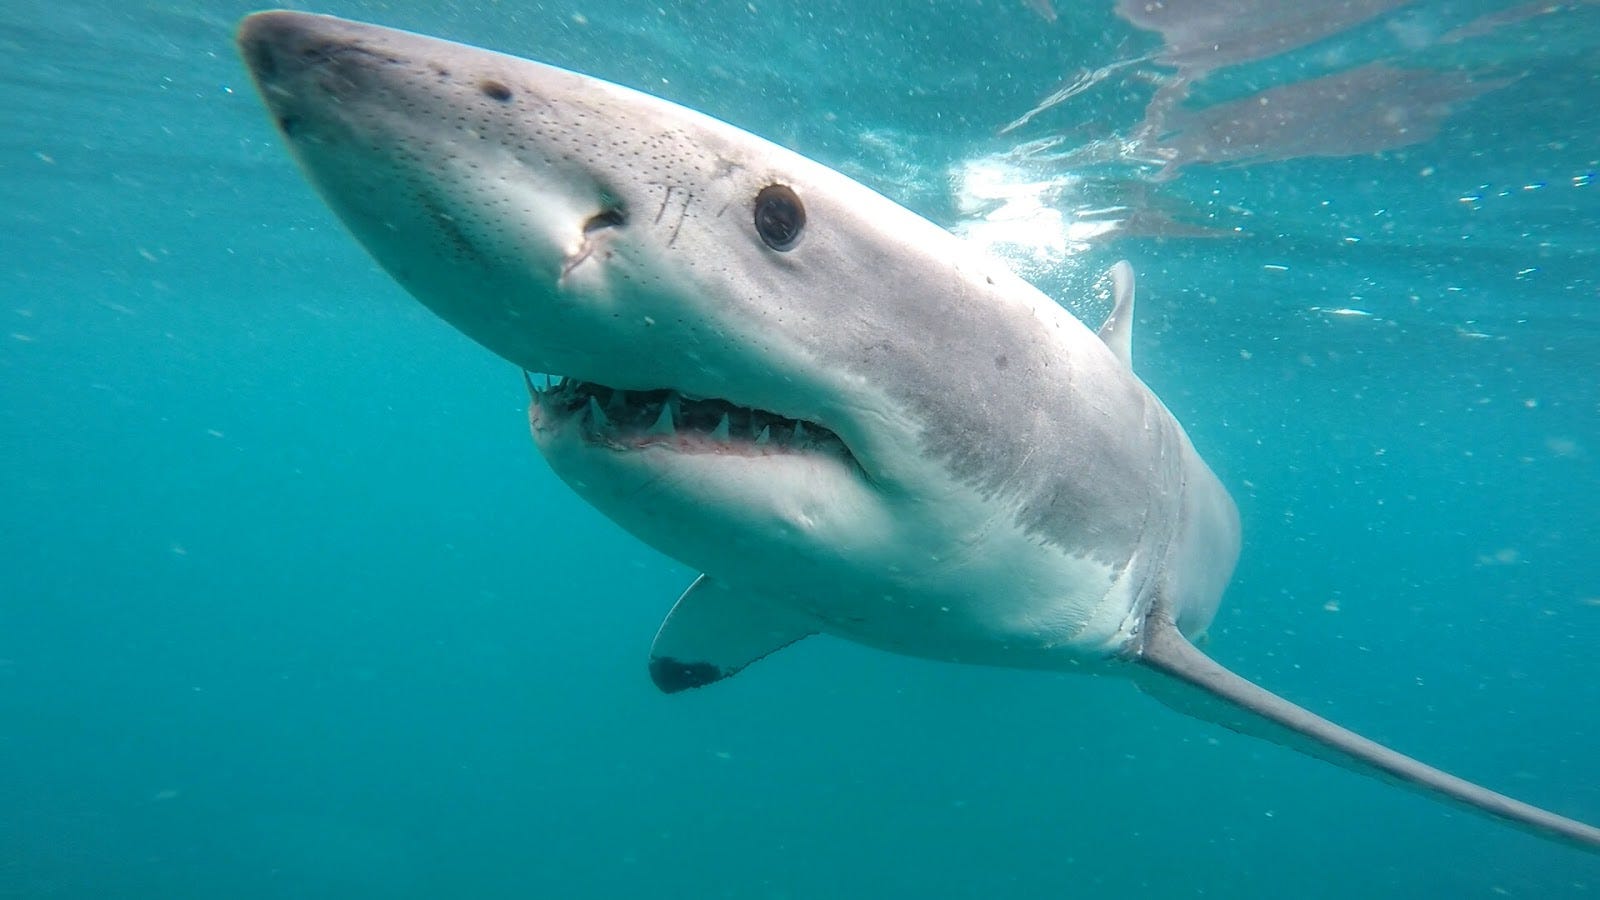 A great white shark photographed during an Oceans Research Institute’s shark population study. Photo by Esther Jacobs, Oceans Research Institute.